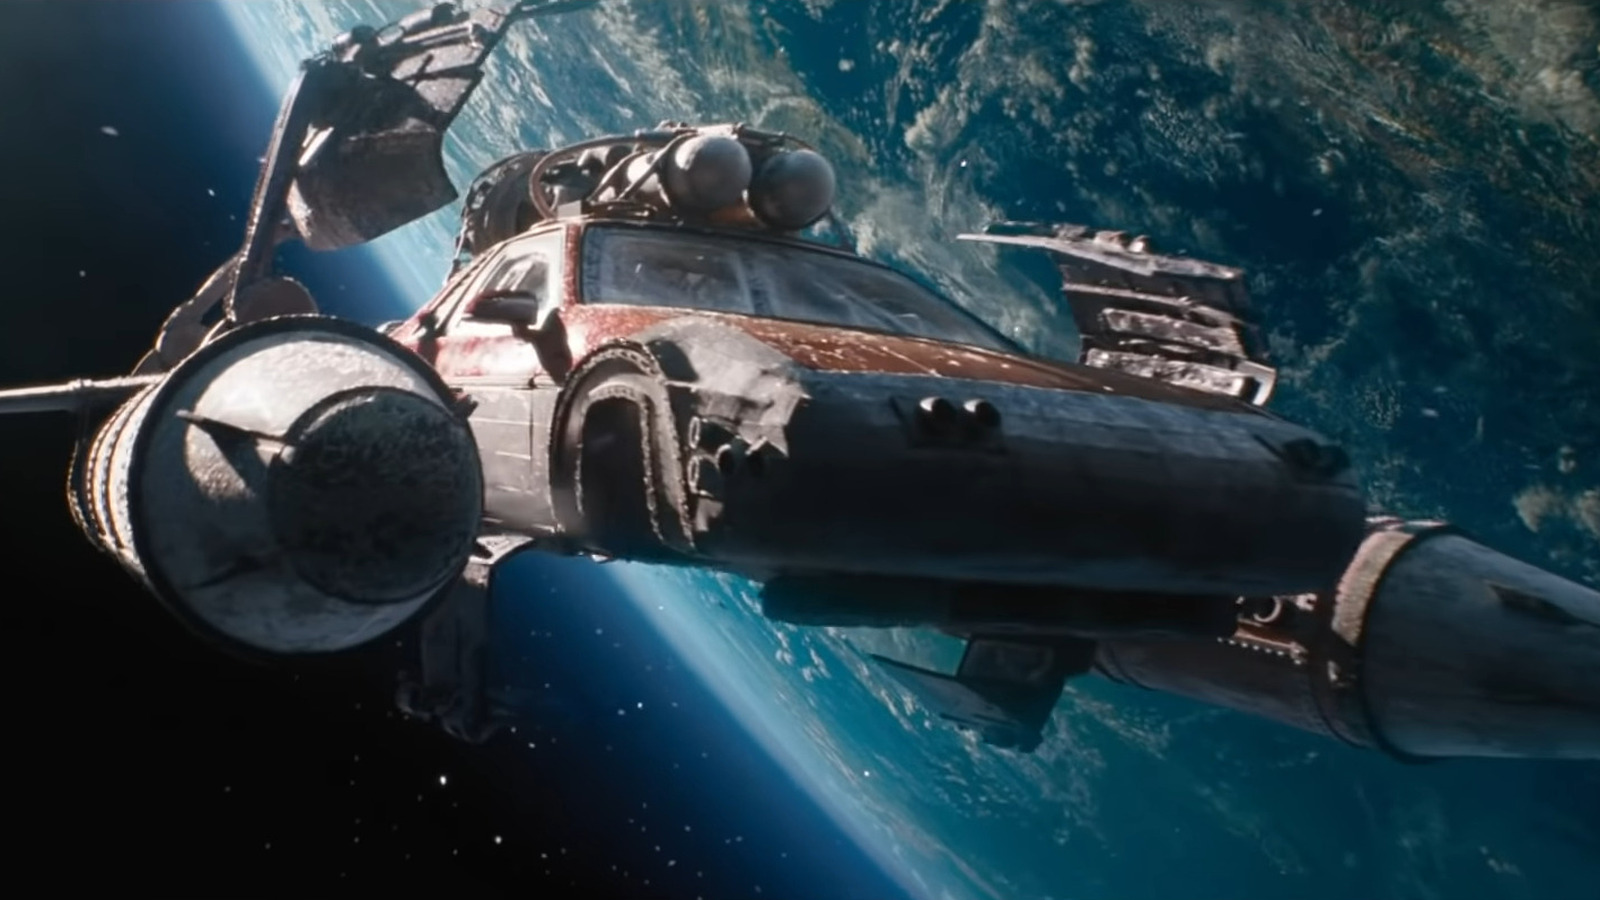 Ridiculous nonsense: Astronaut analyzed the space flight scene in F9: The Fast Saga